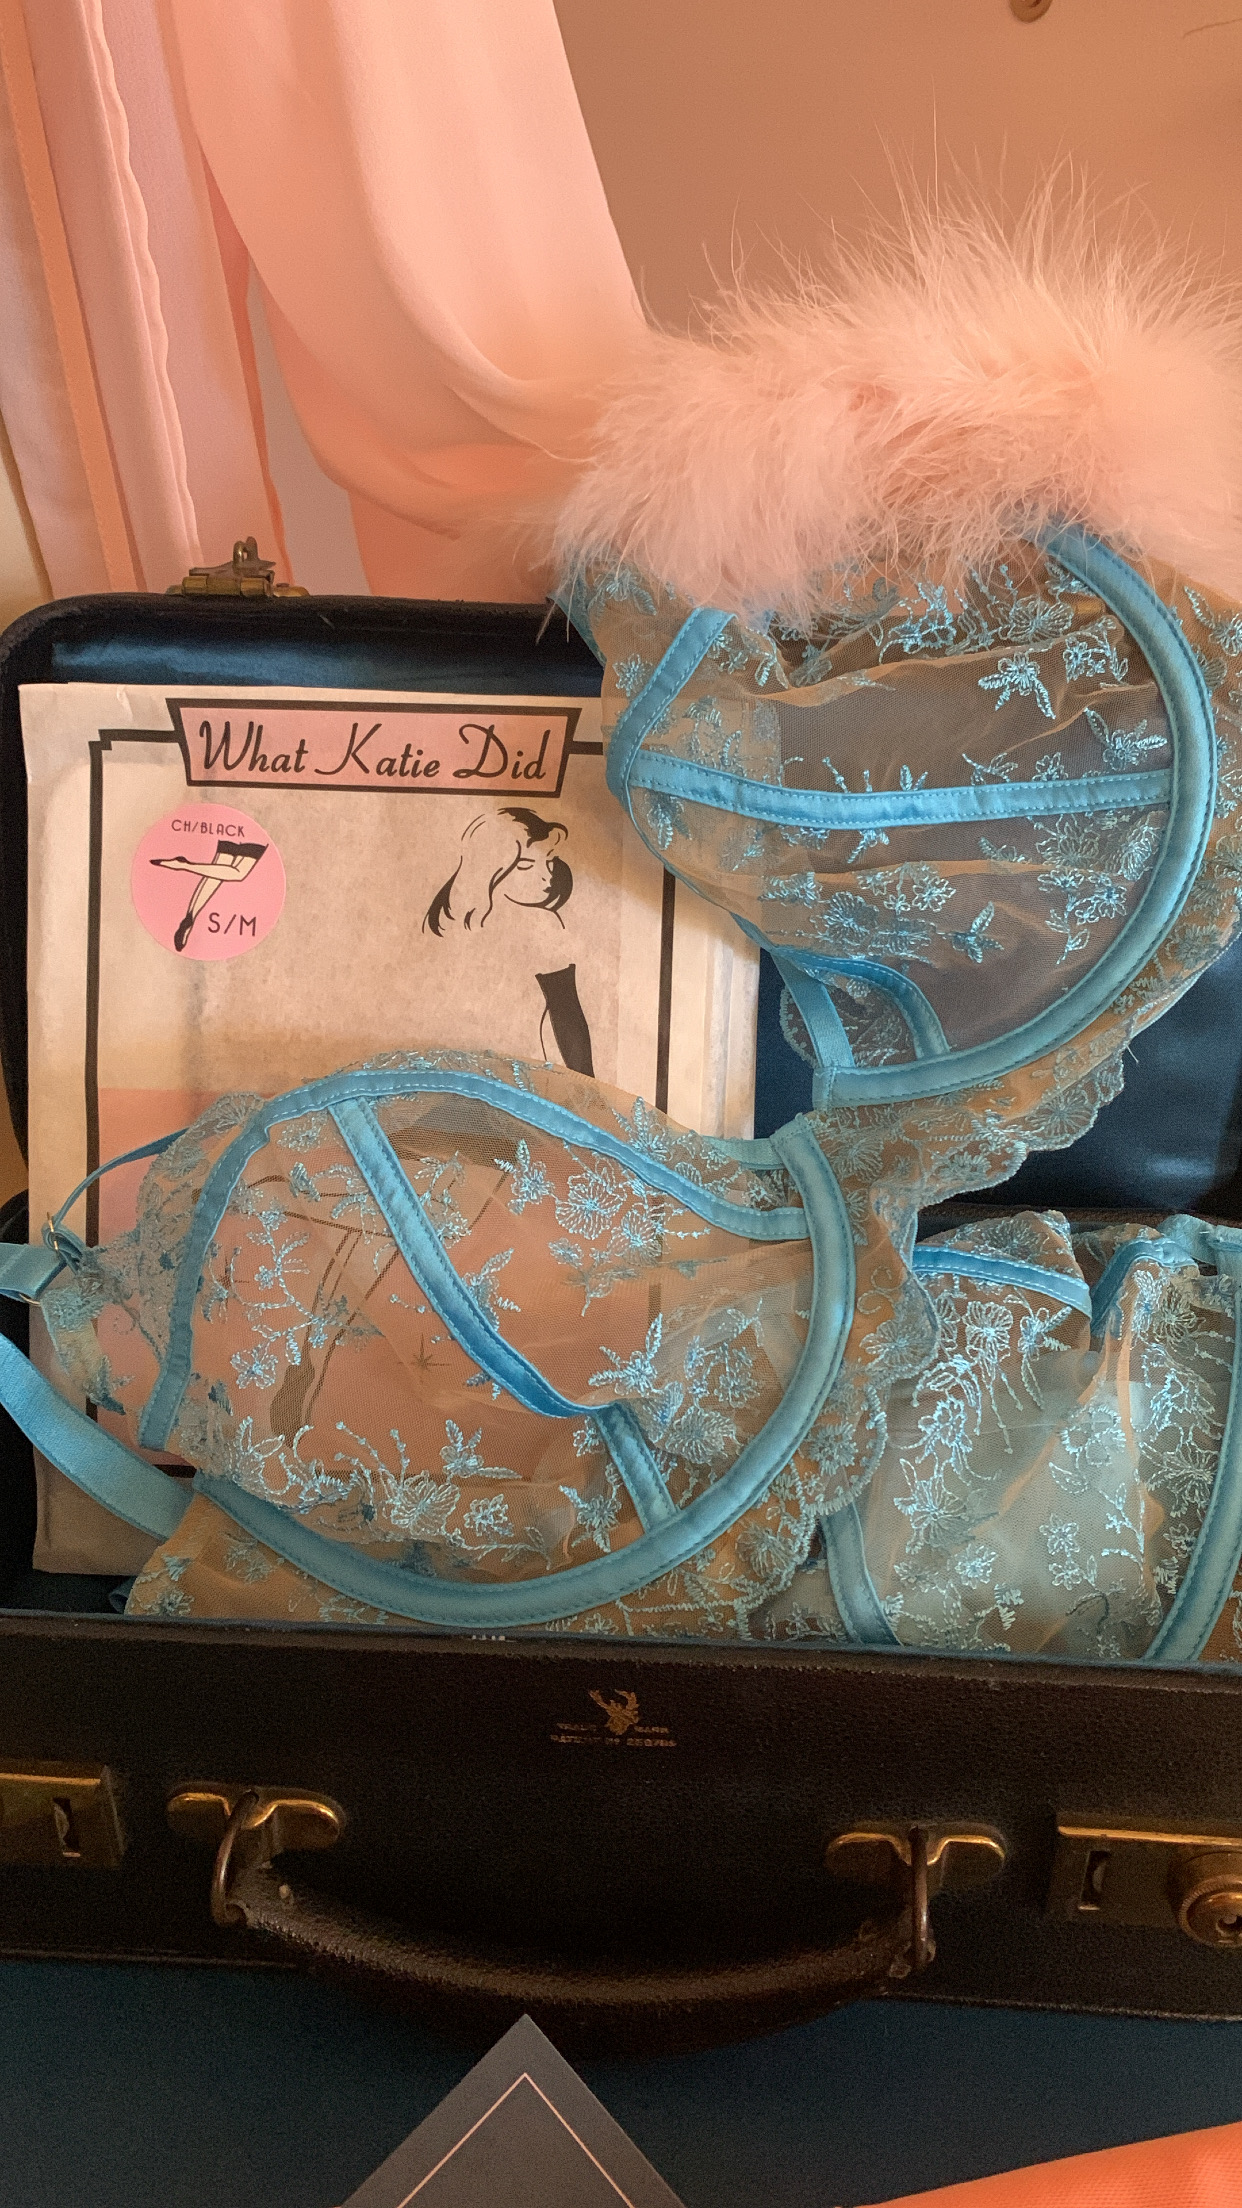 Blue embroidered bra lying in black leather case with seamed stocking packs and feather trimmed robe in the background